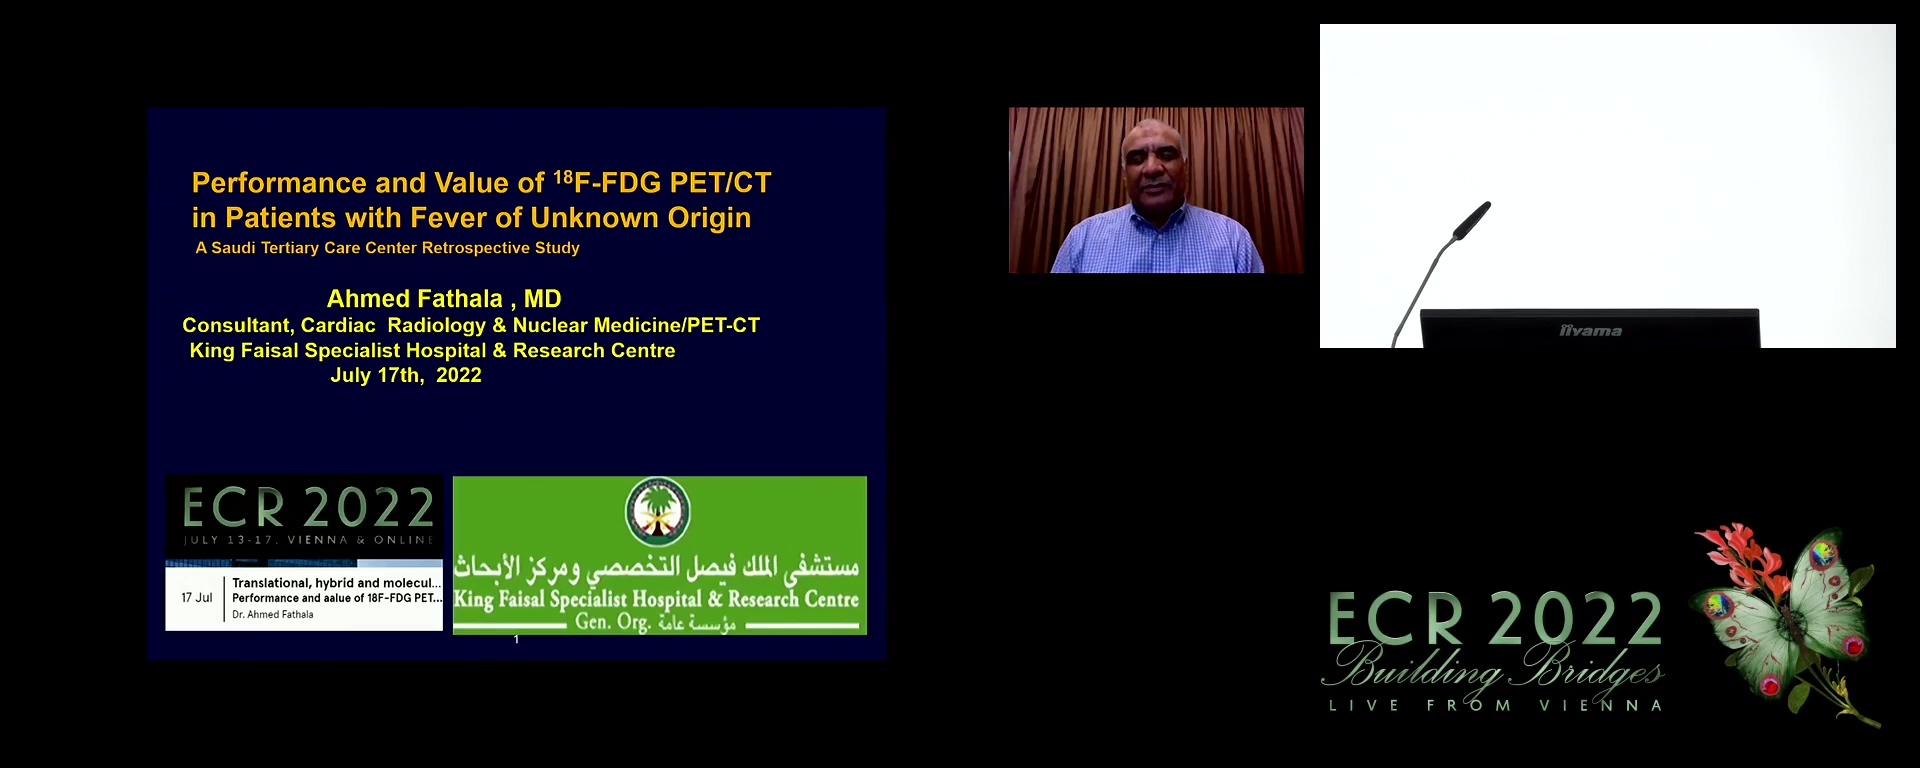 Performance and value of 18F-FDG PET/CT in patients with fever of unknown origin: a saudi tertiary care centre retrospective study - Ahmed Fathala, Riyadh / SA